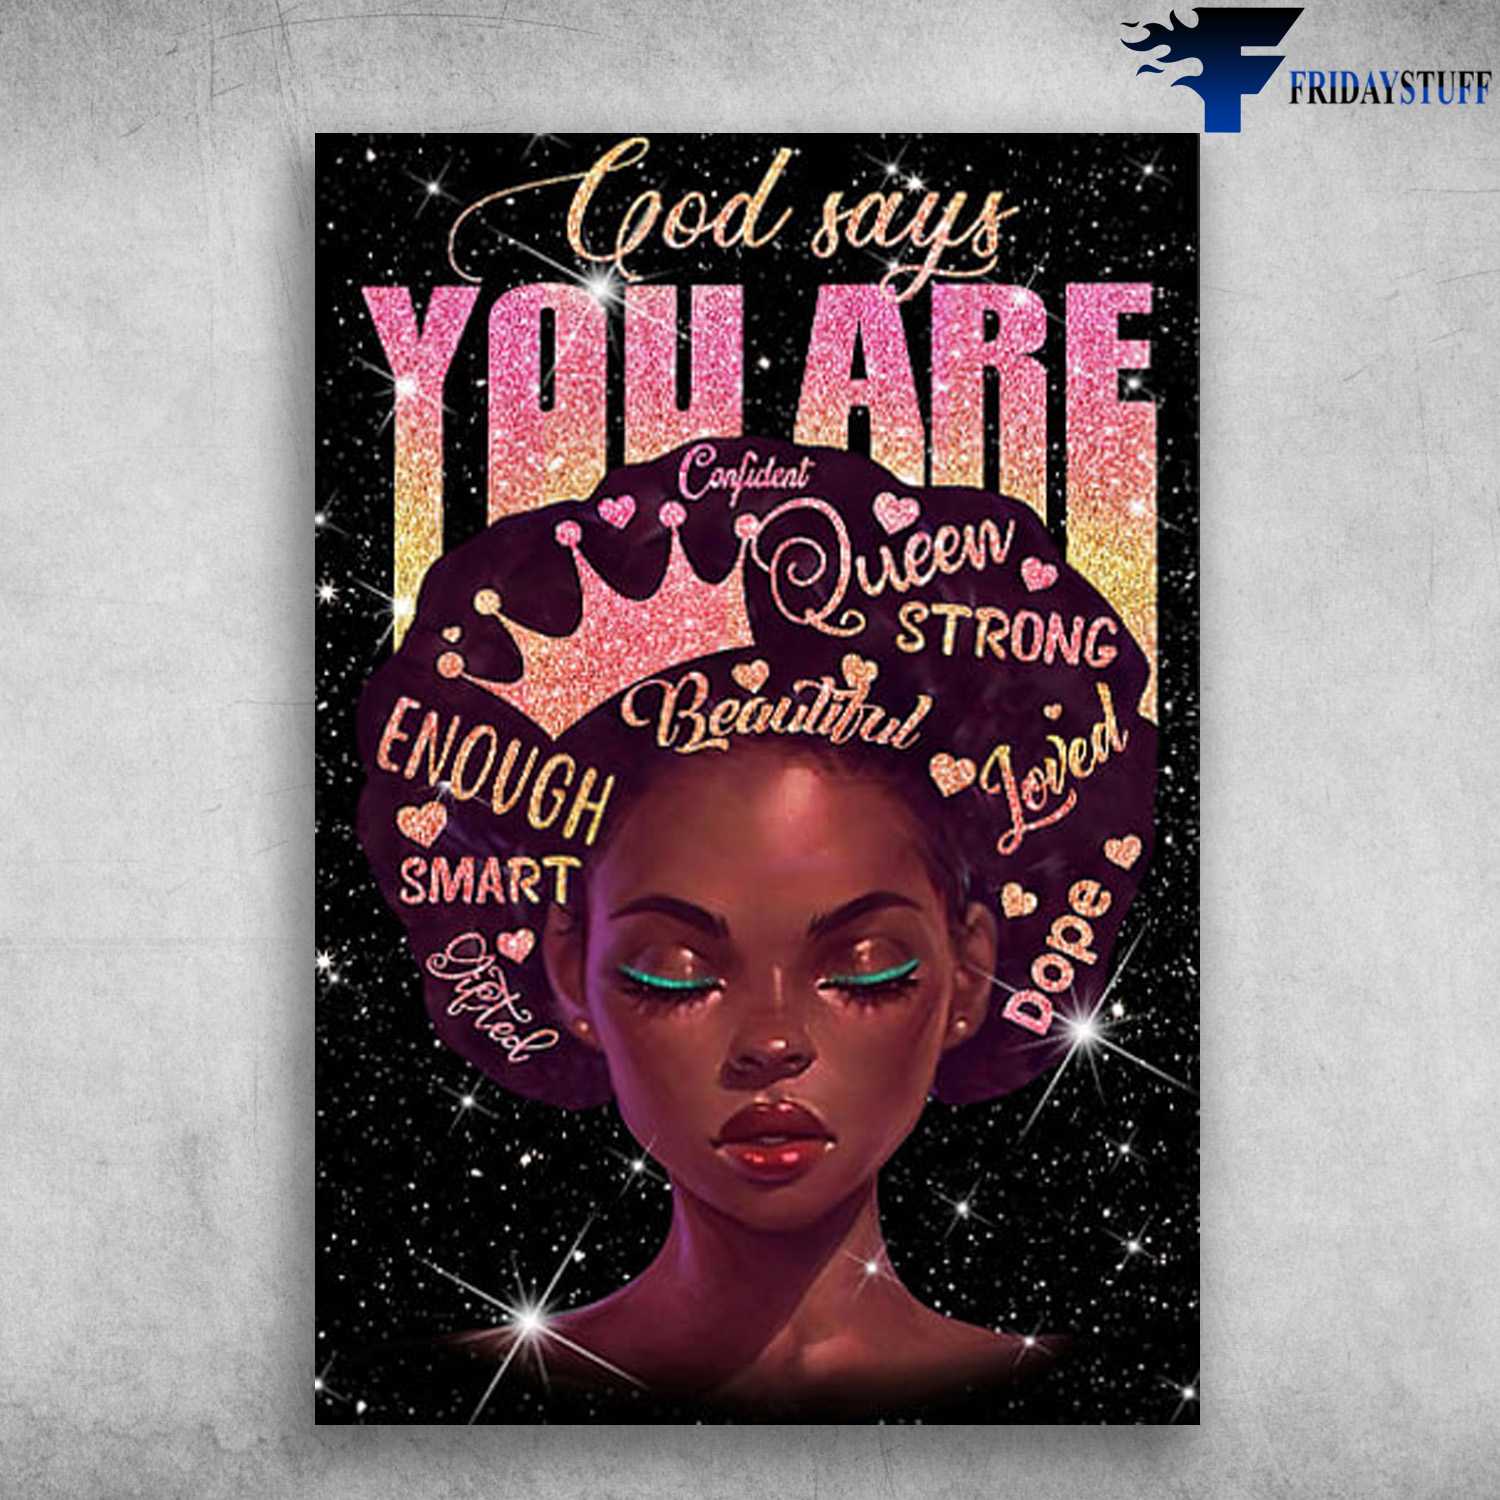 Black Queen - God Says You Are Confident, Strong, Beautiful, Enough, Smart, Loved, Dope